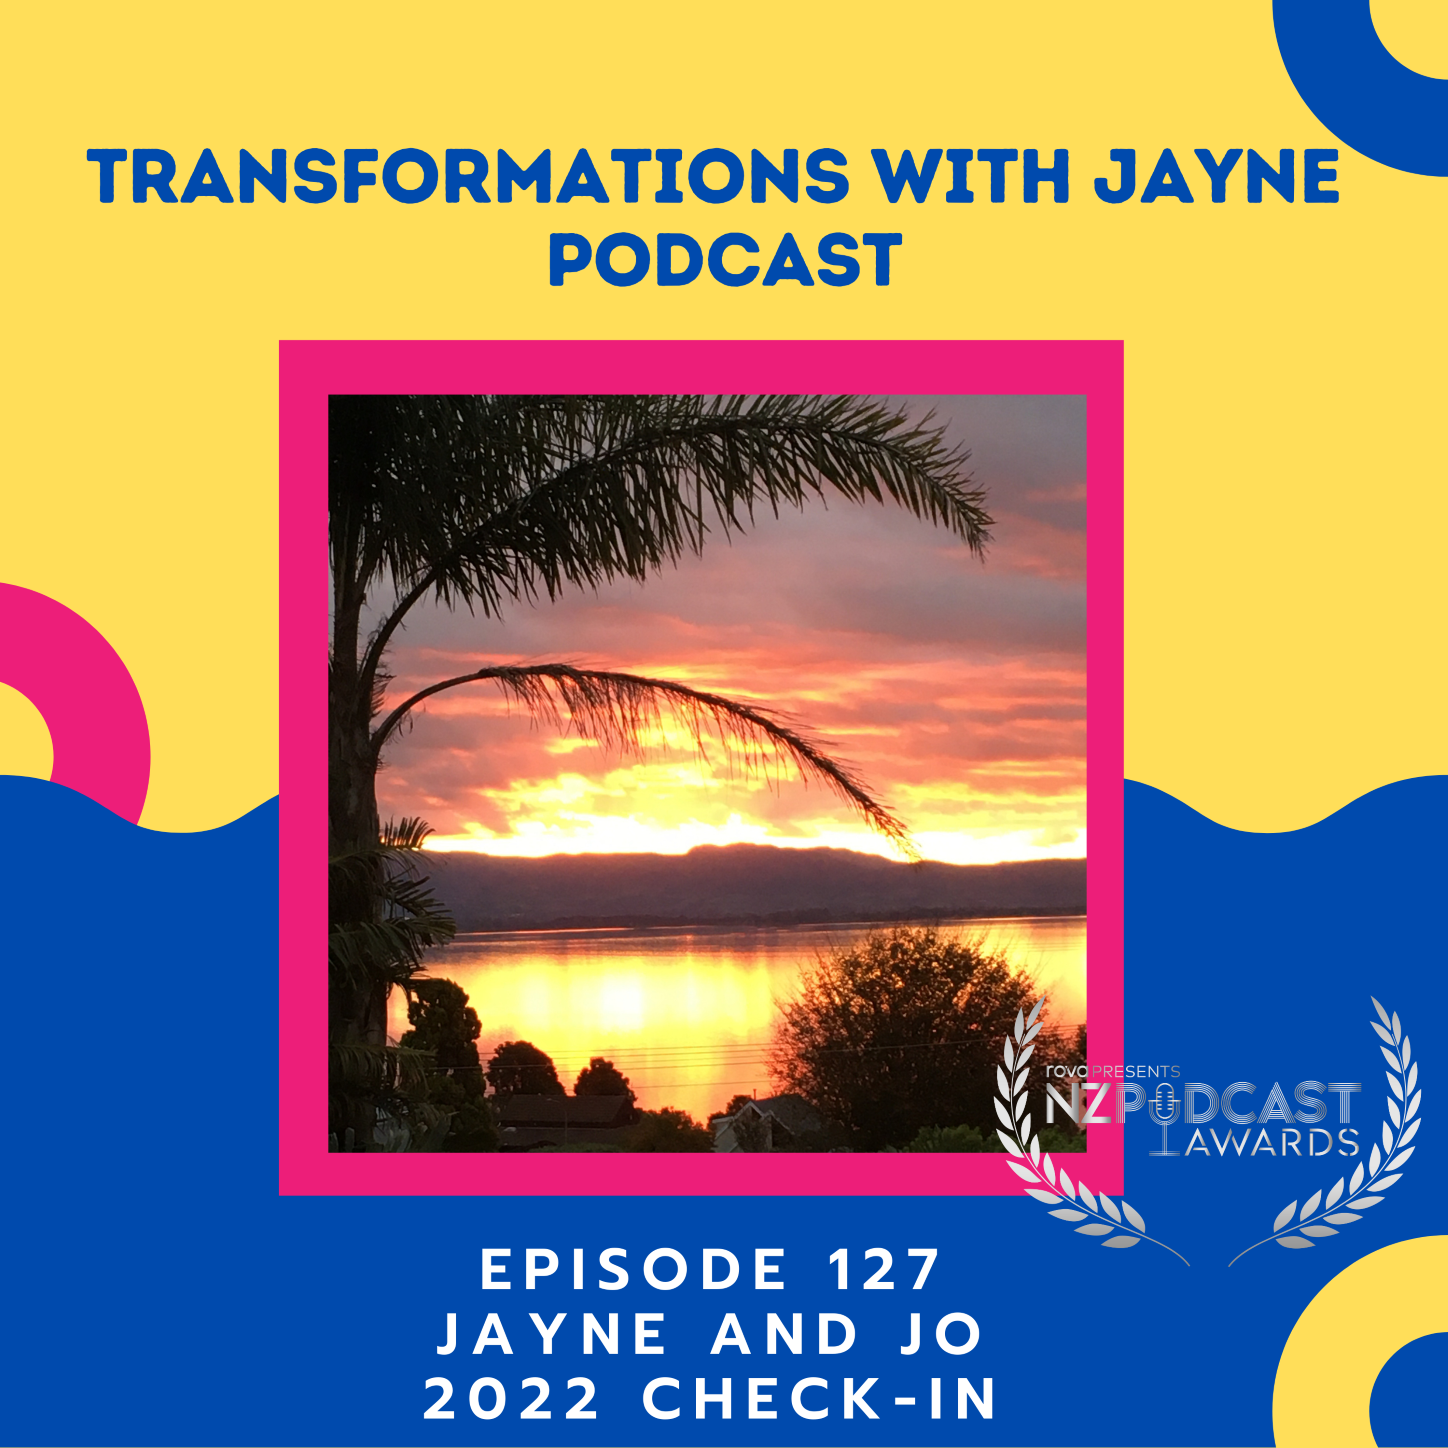 Artwork for podcast Transformations with Jayne